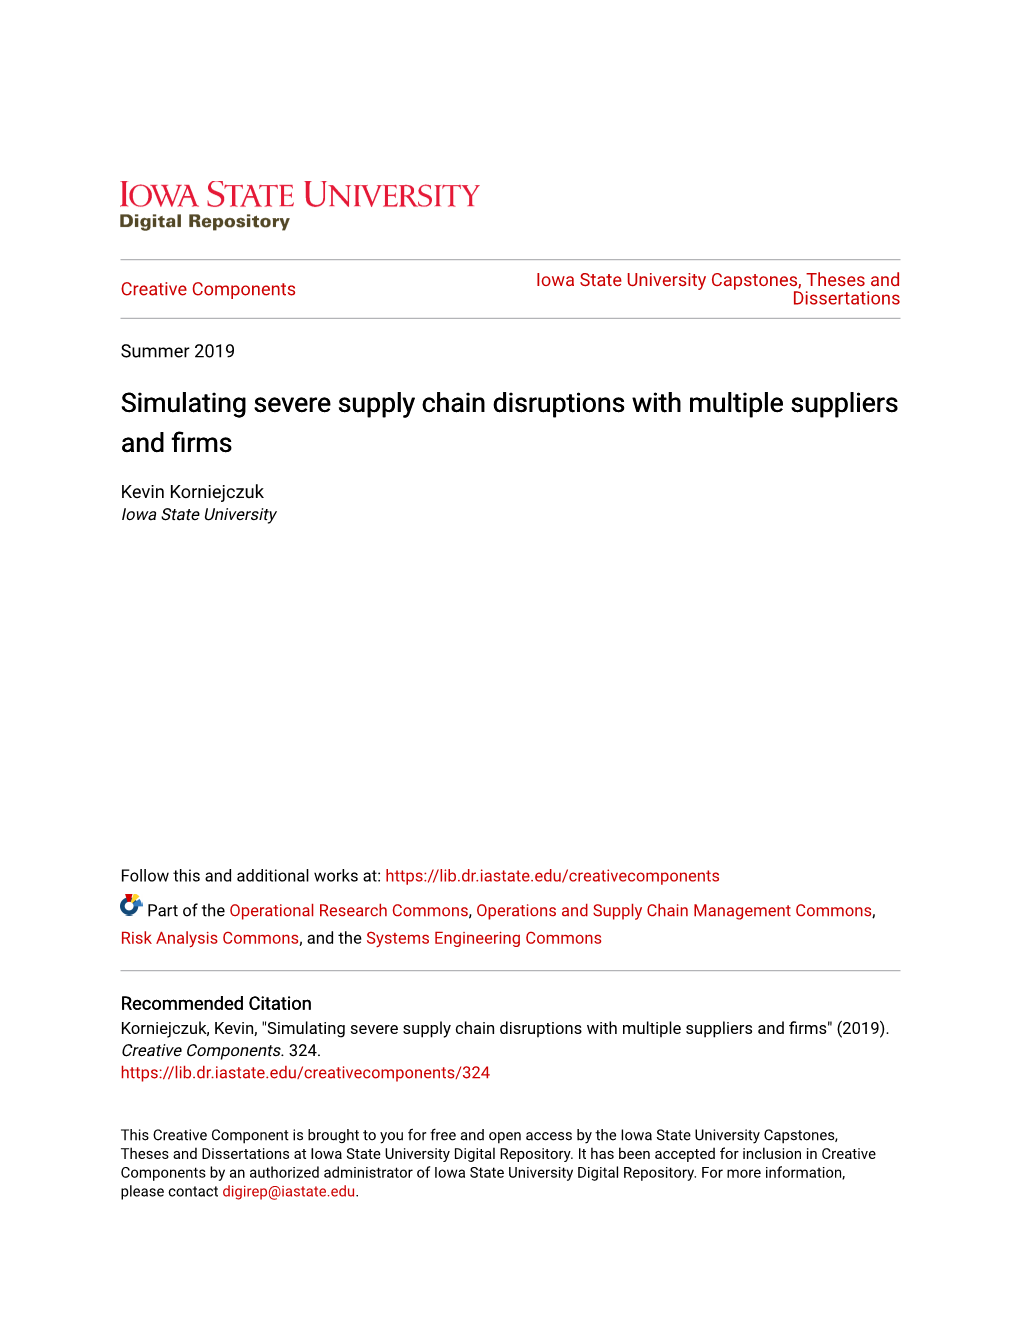 Simulating Severe Supply Chain Disruptions with Multiple Suppliers and Firms